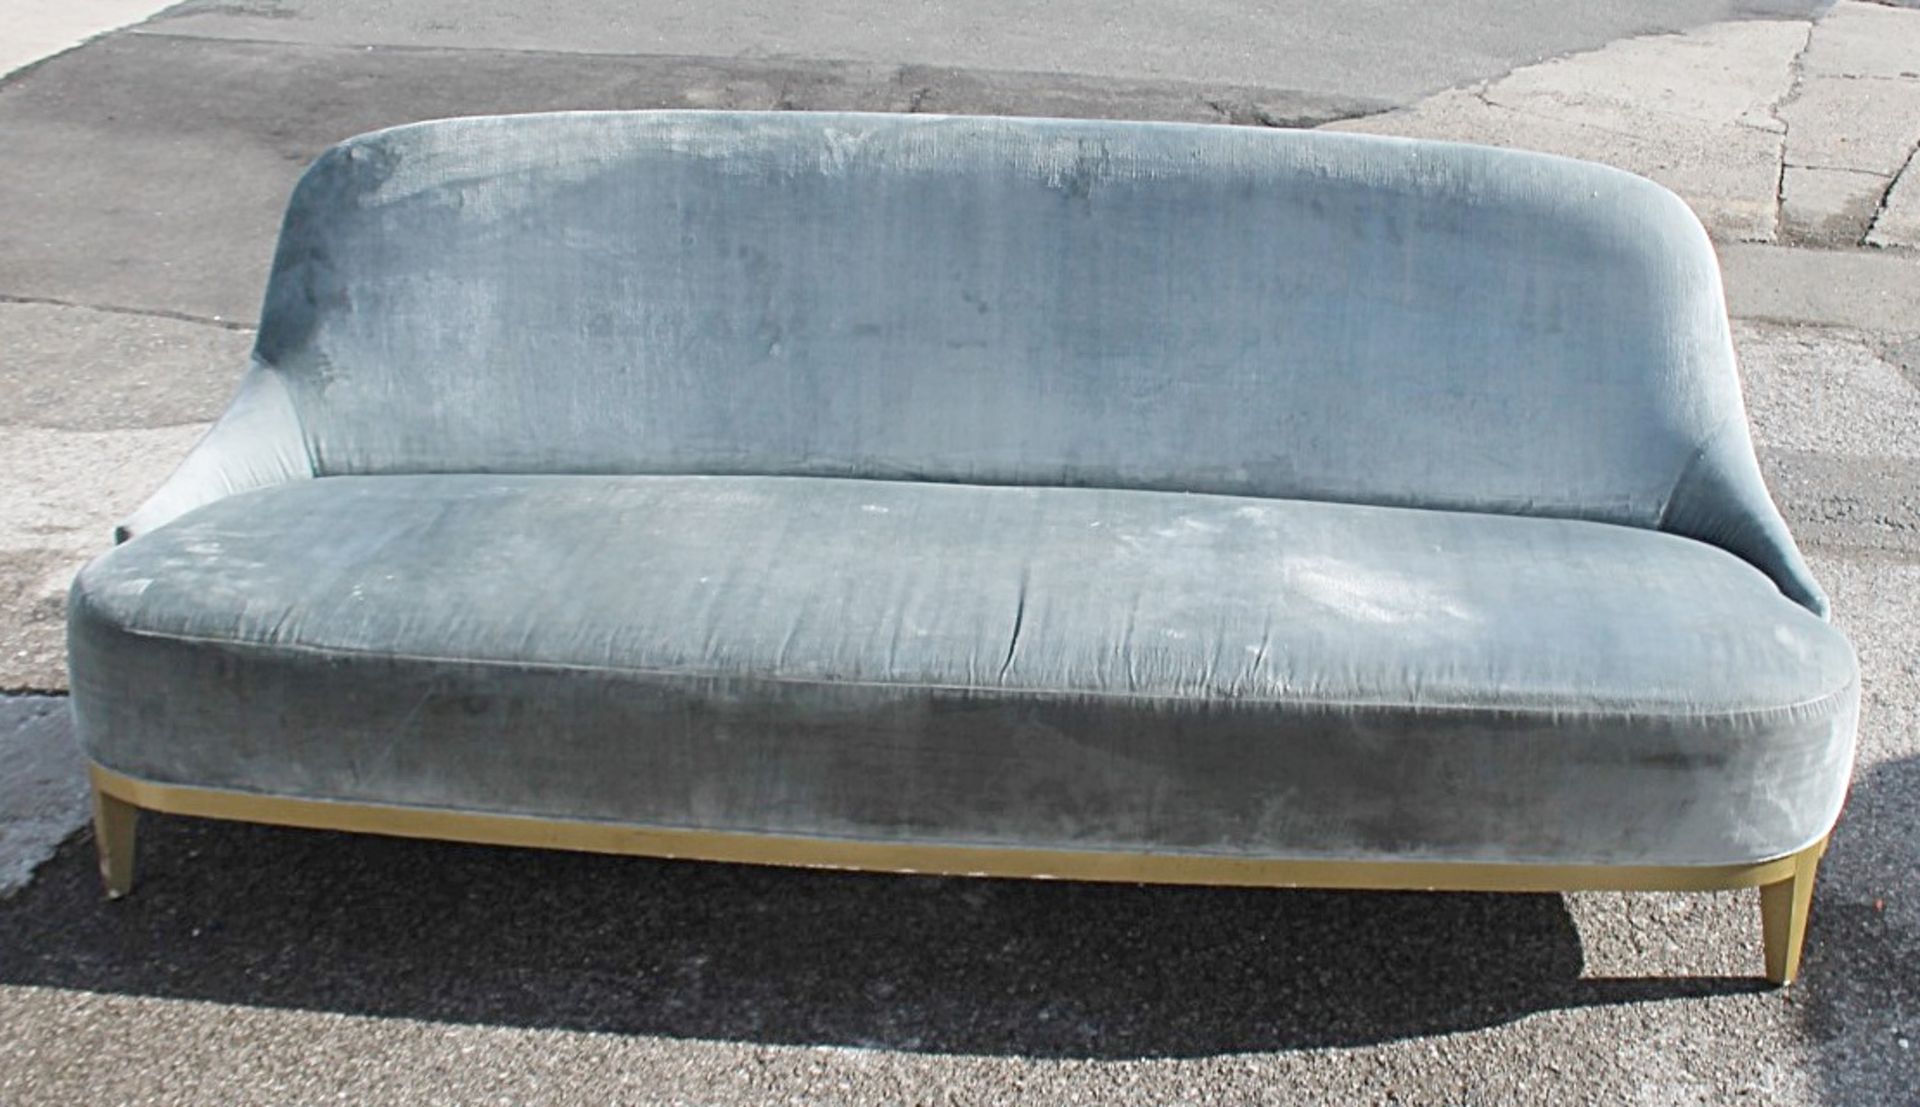 1 x Opulent Velvet Upholstered Sofa In Blue-Silver Tone With A Curved Base In Gold - Image 9 of 13